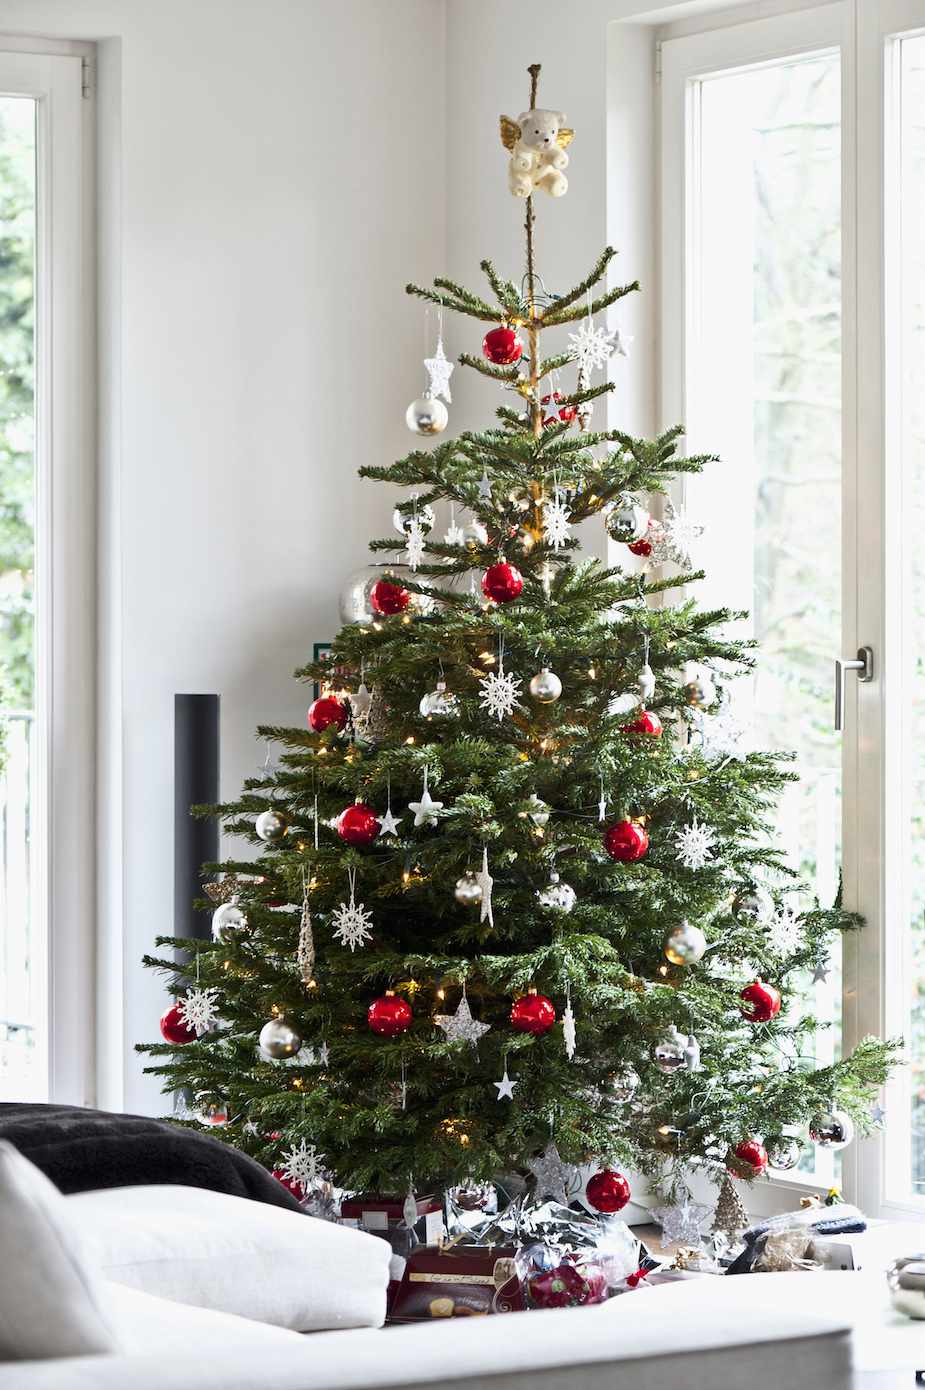 When Should You Buy A Real Christmas Tree?